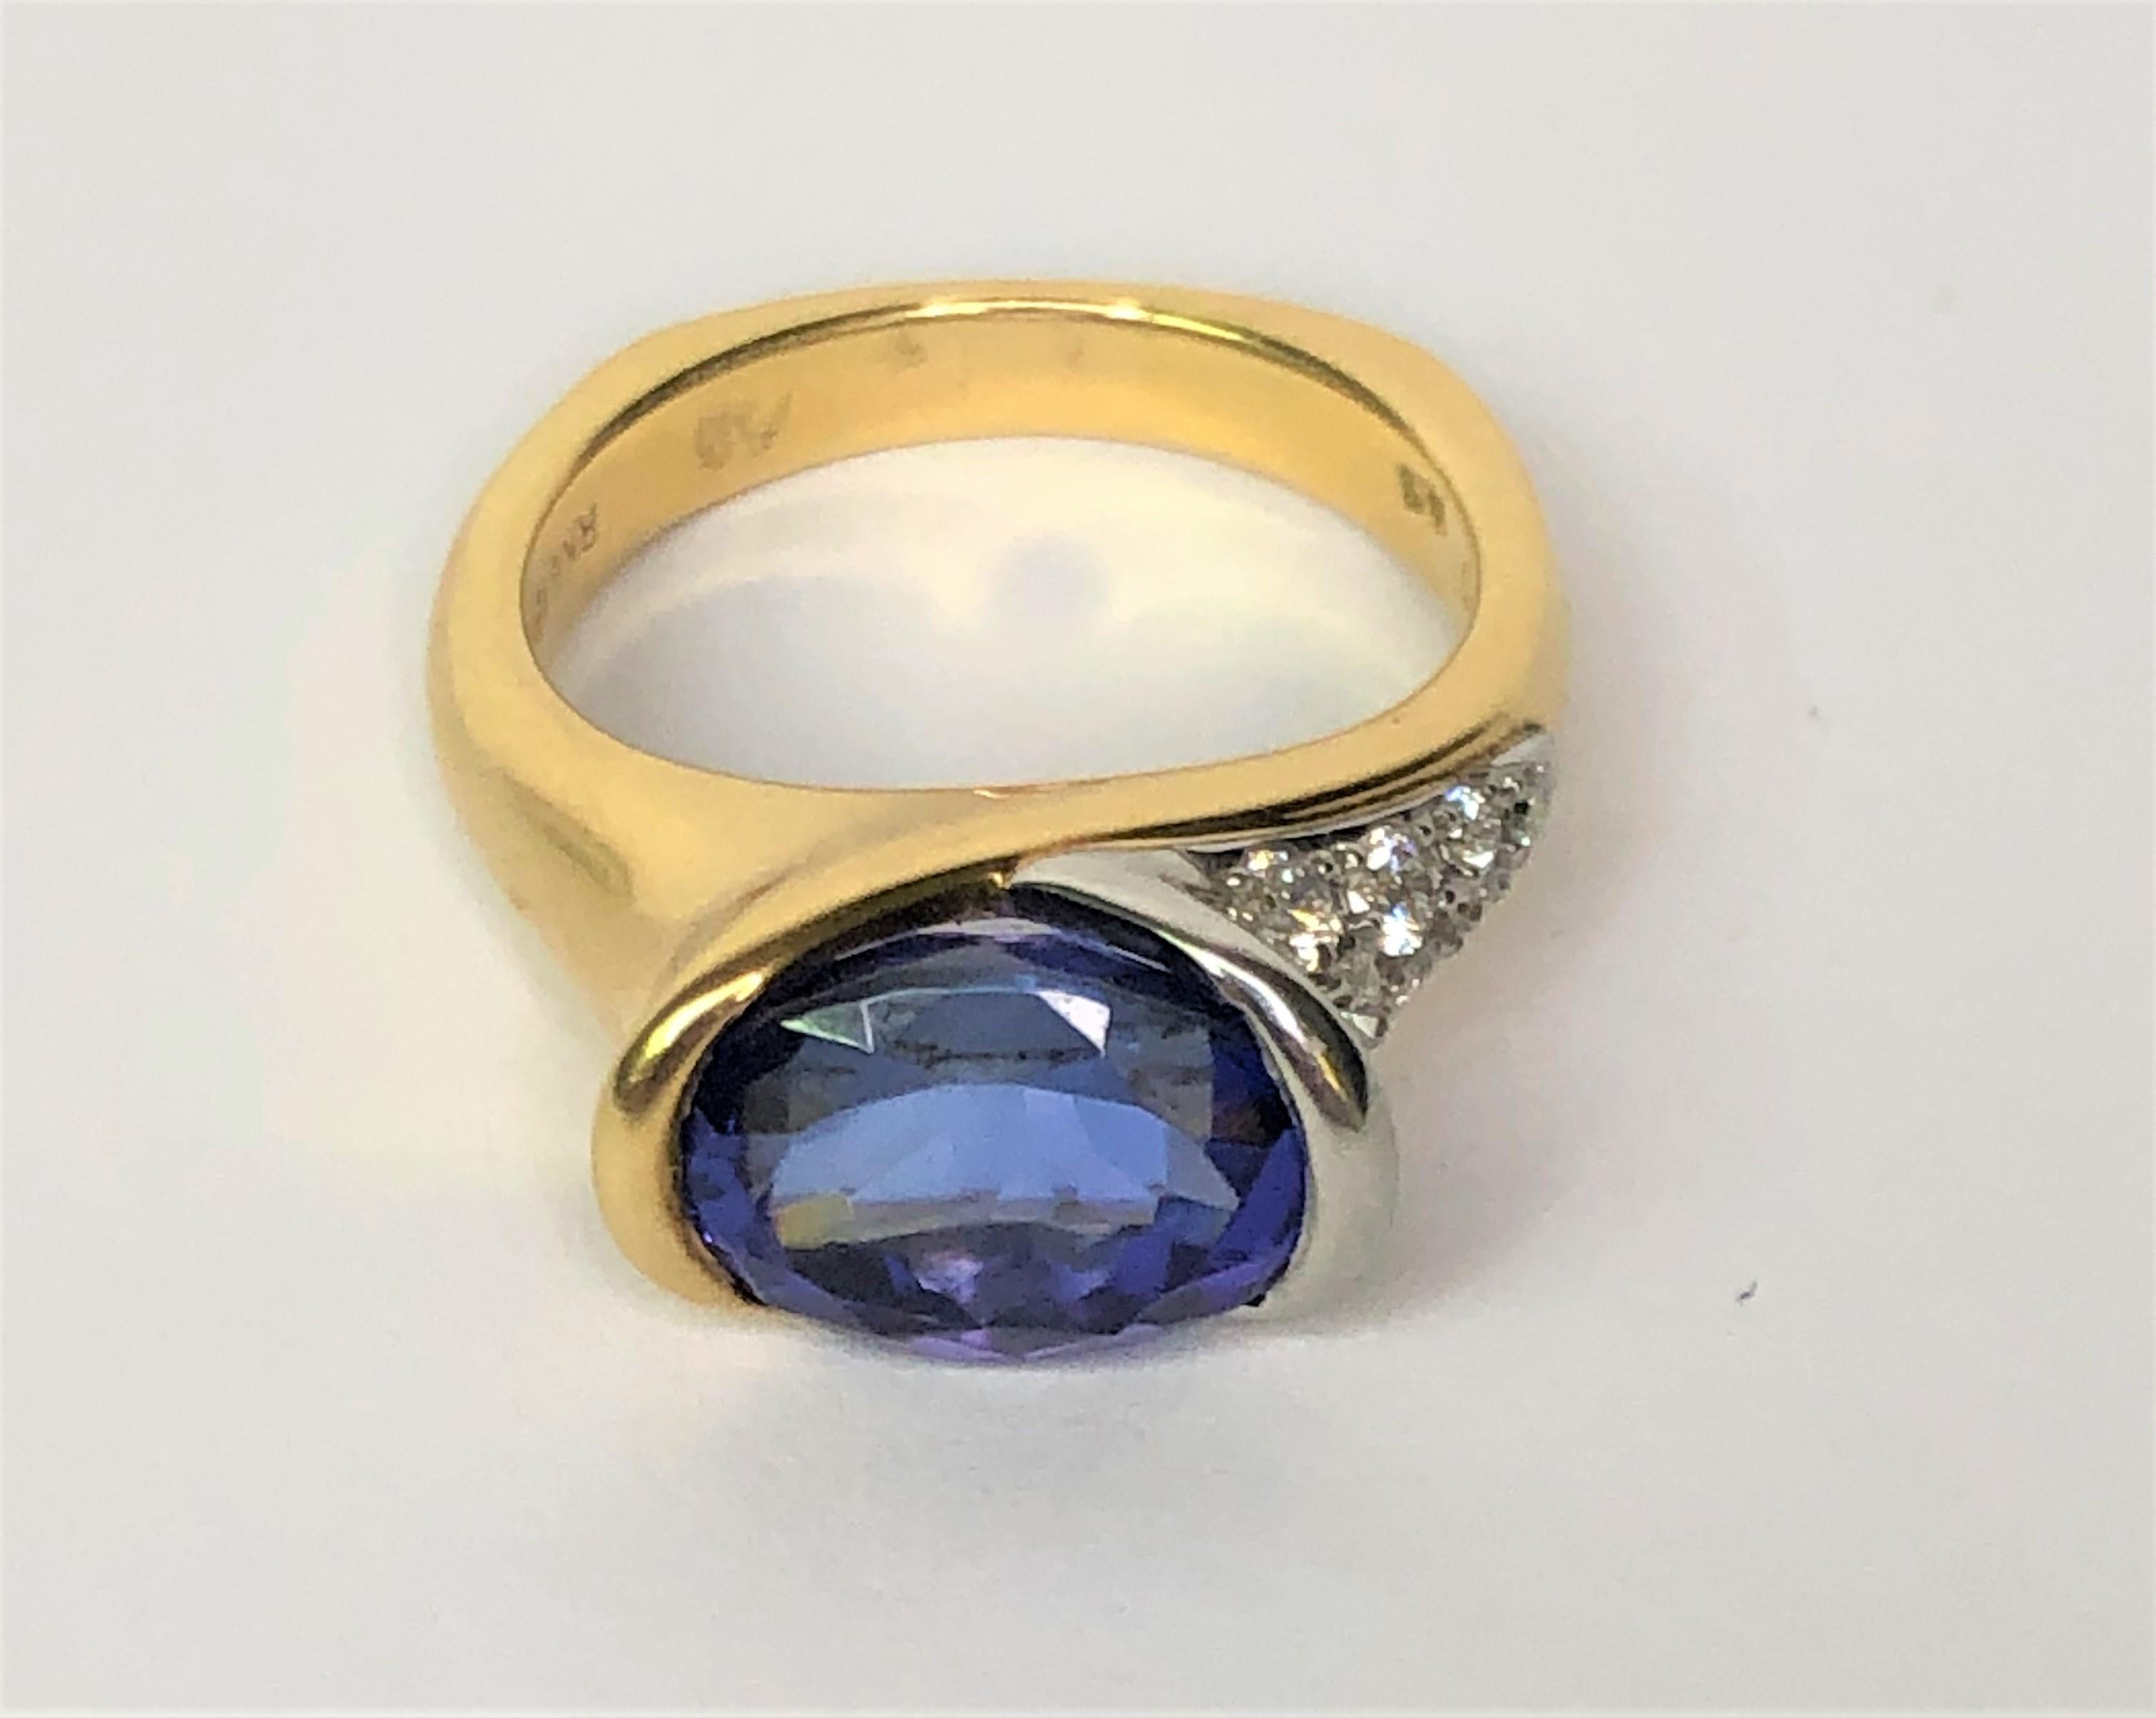 Simple, classic and beautiful - true to his craftmanship!  This special Richard Krementz ring is amazing!!
18 karat yellow gold and platinum.
Center stone is a 4.8 carat oval cut tanzanite in a gold and platinum head.
Platinum side of shoulder has 8